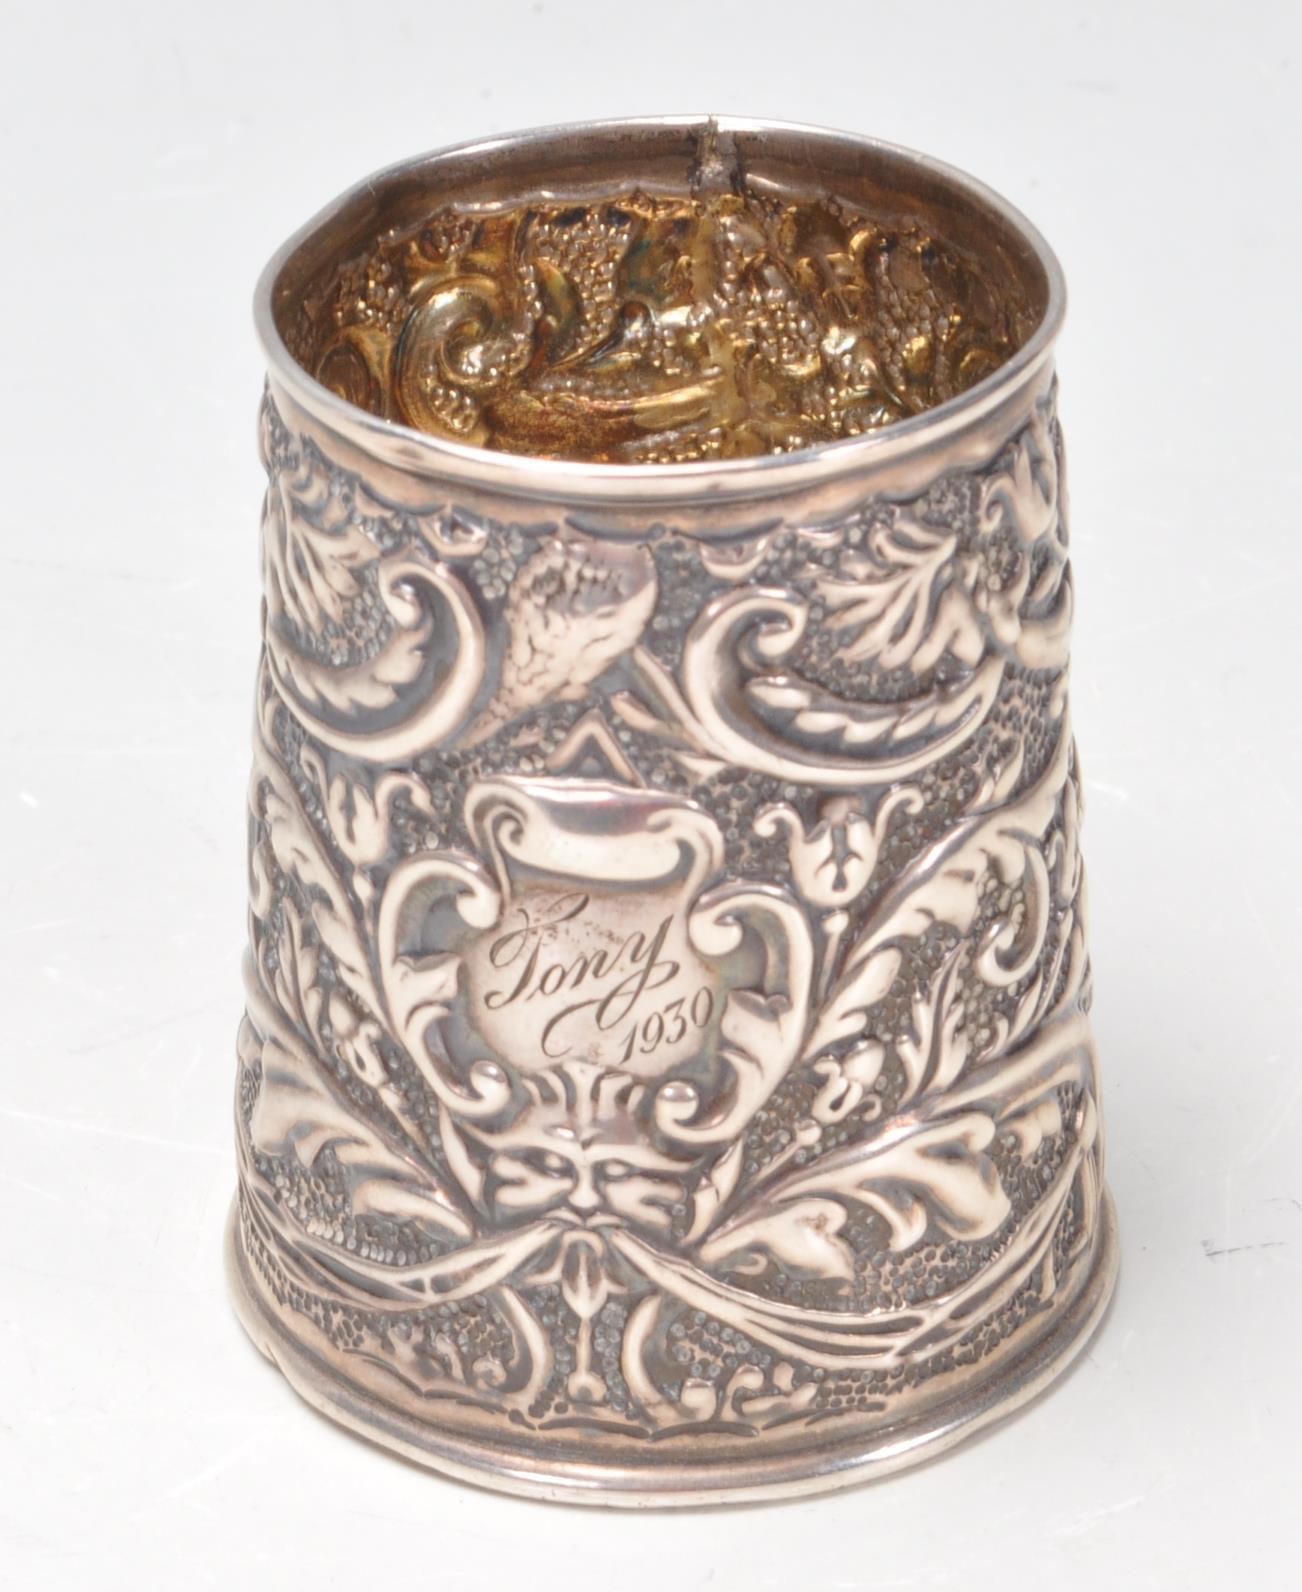 EDWARDIAN SILVER CHRISTENING CUP - Image 4 of 7